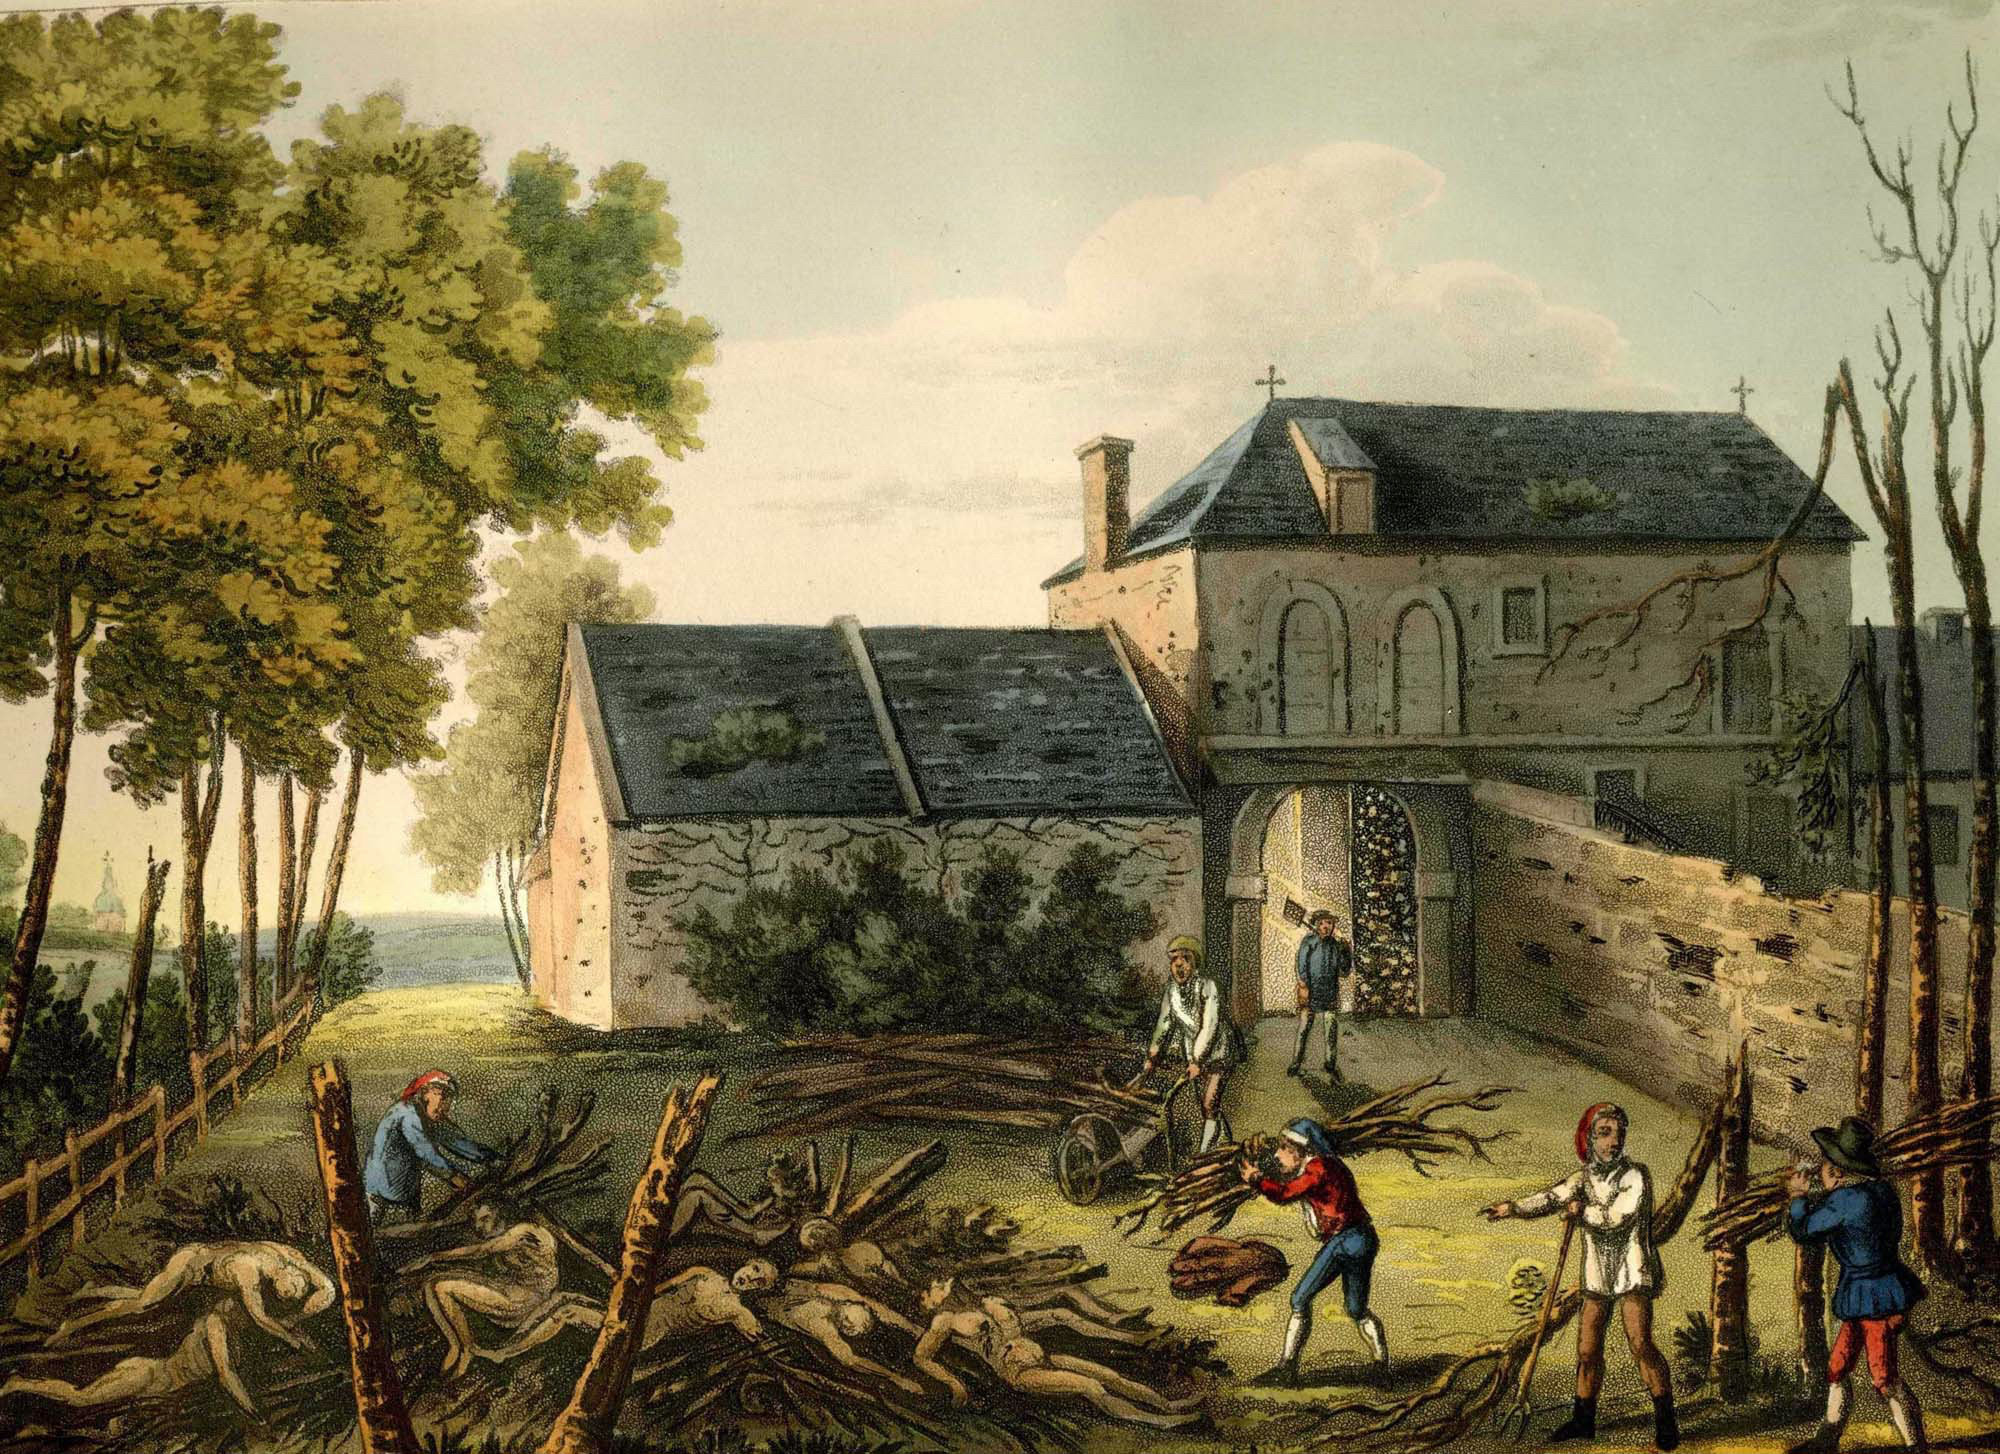 Burning bodies at Hougoumont by James Rouse.